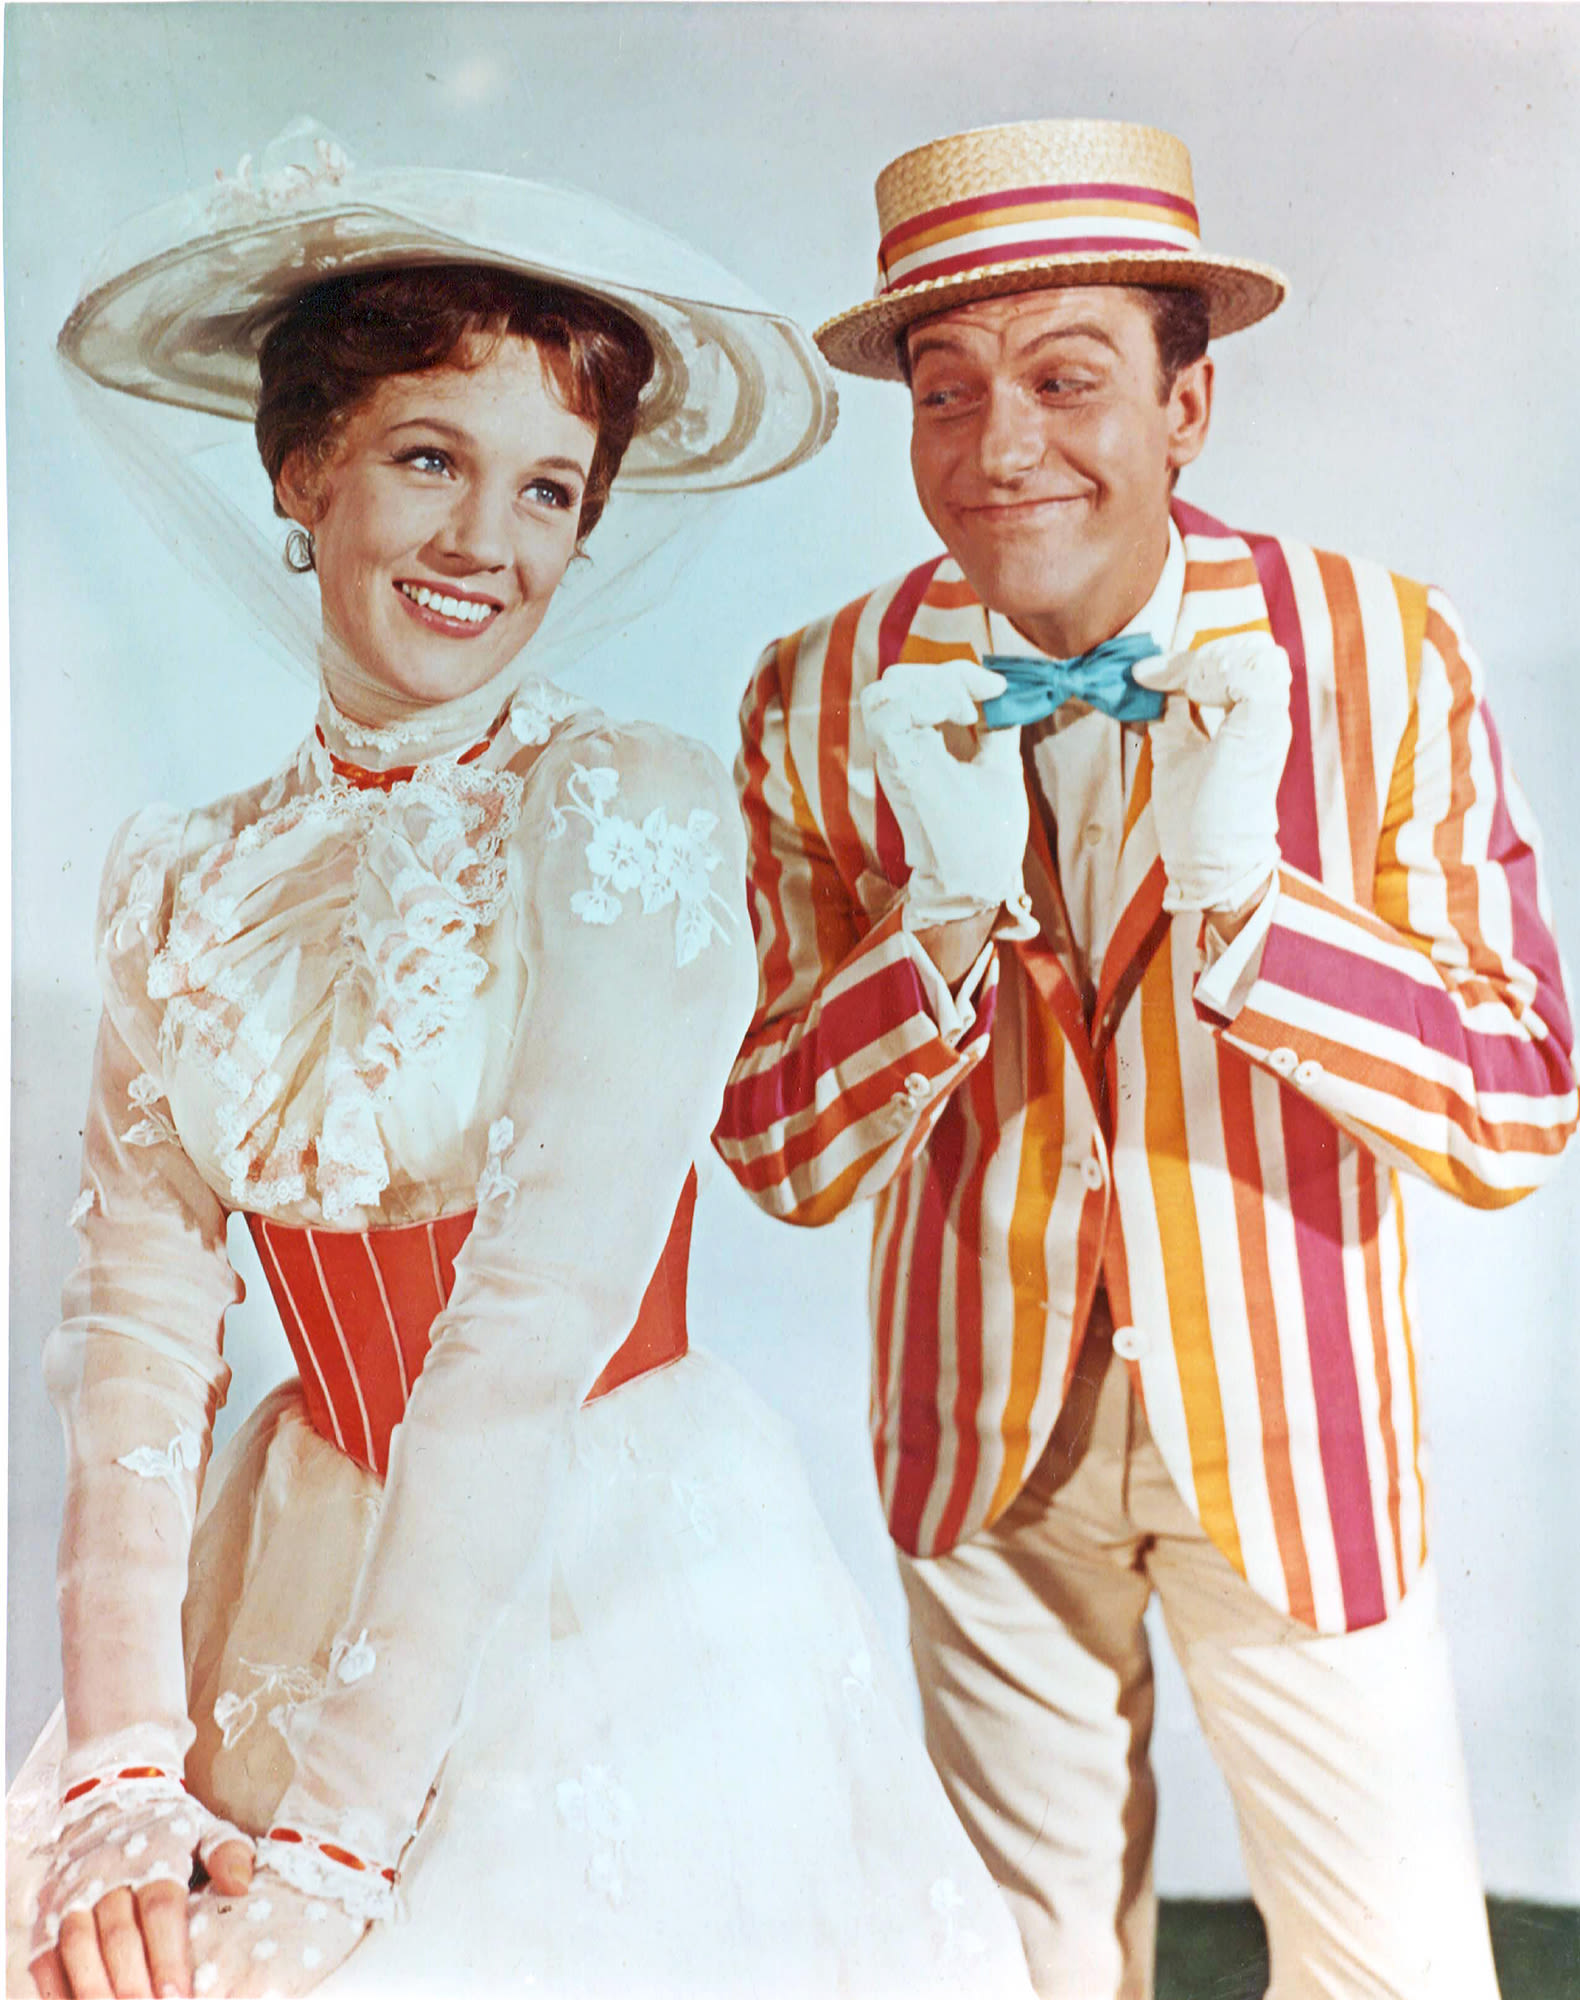 Dick Van Dyke Reminisces on Filming ‘Mary Poppins’ With ‘Gorgeous’ Julie Andrews